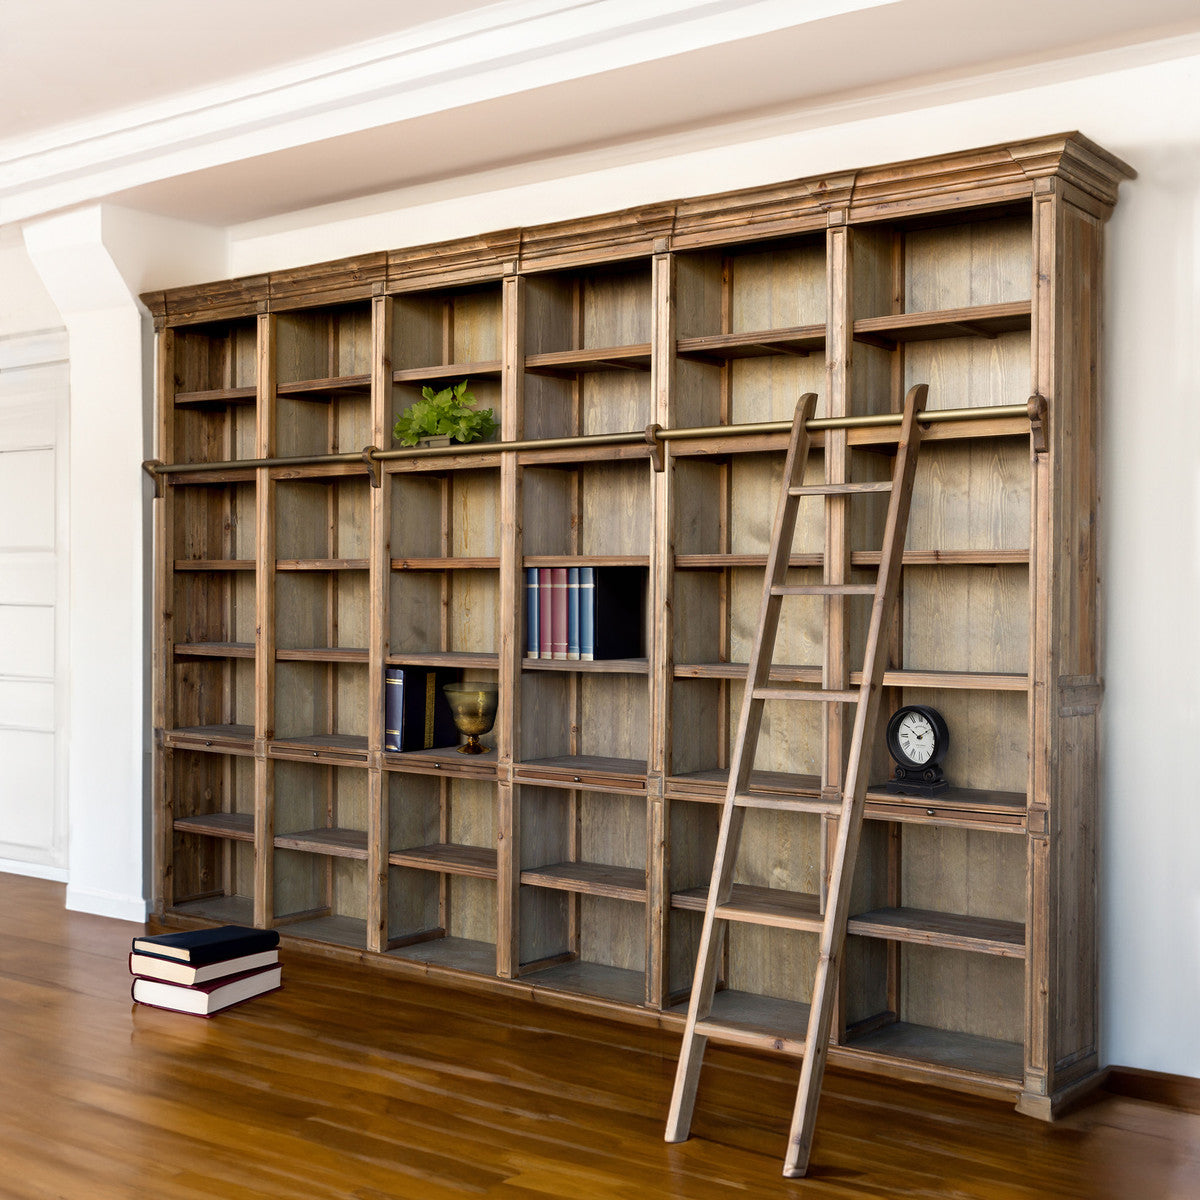 General Store Wall Unit by Park Hill